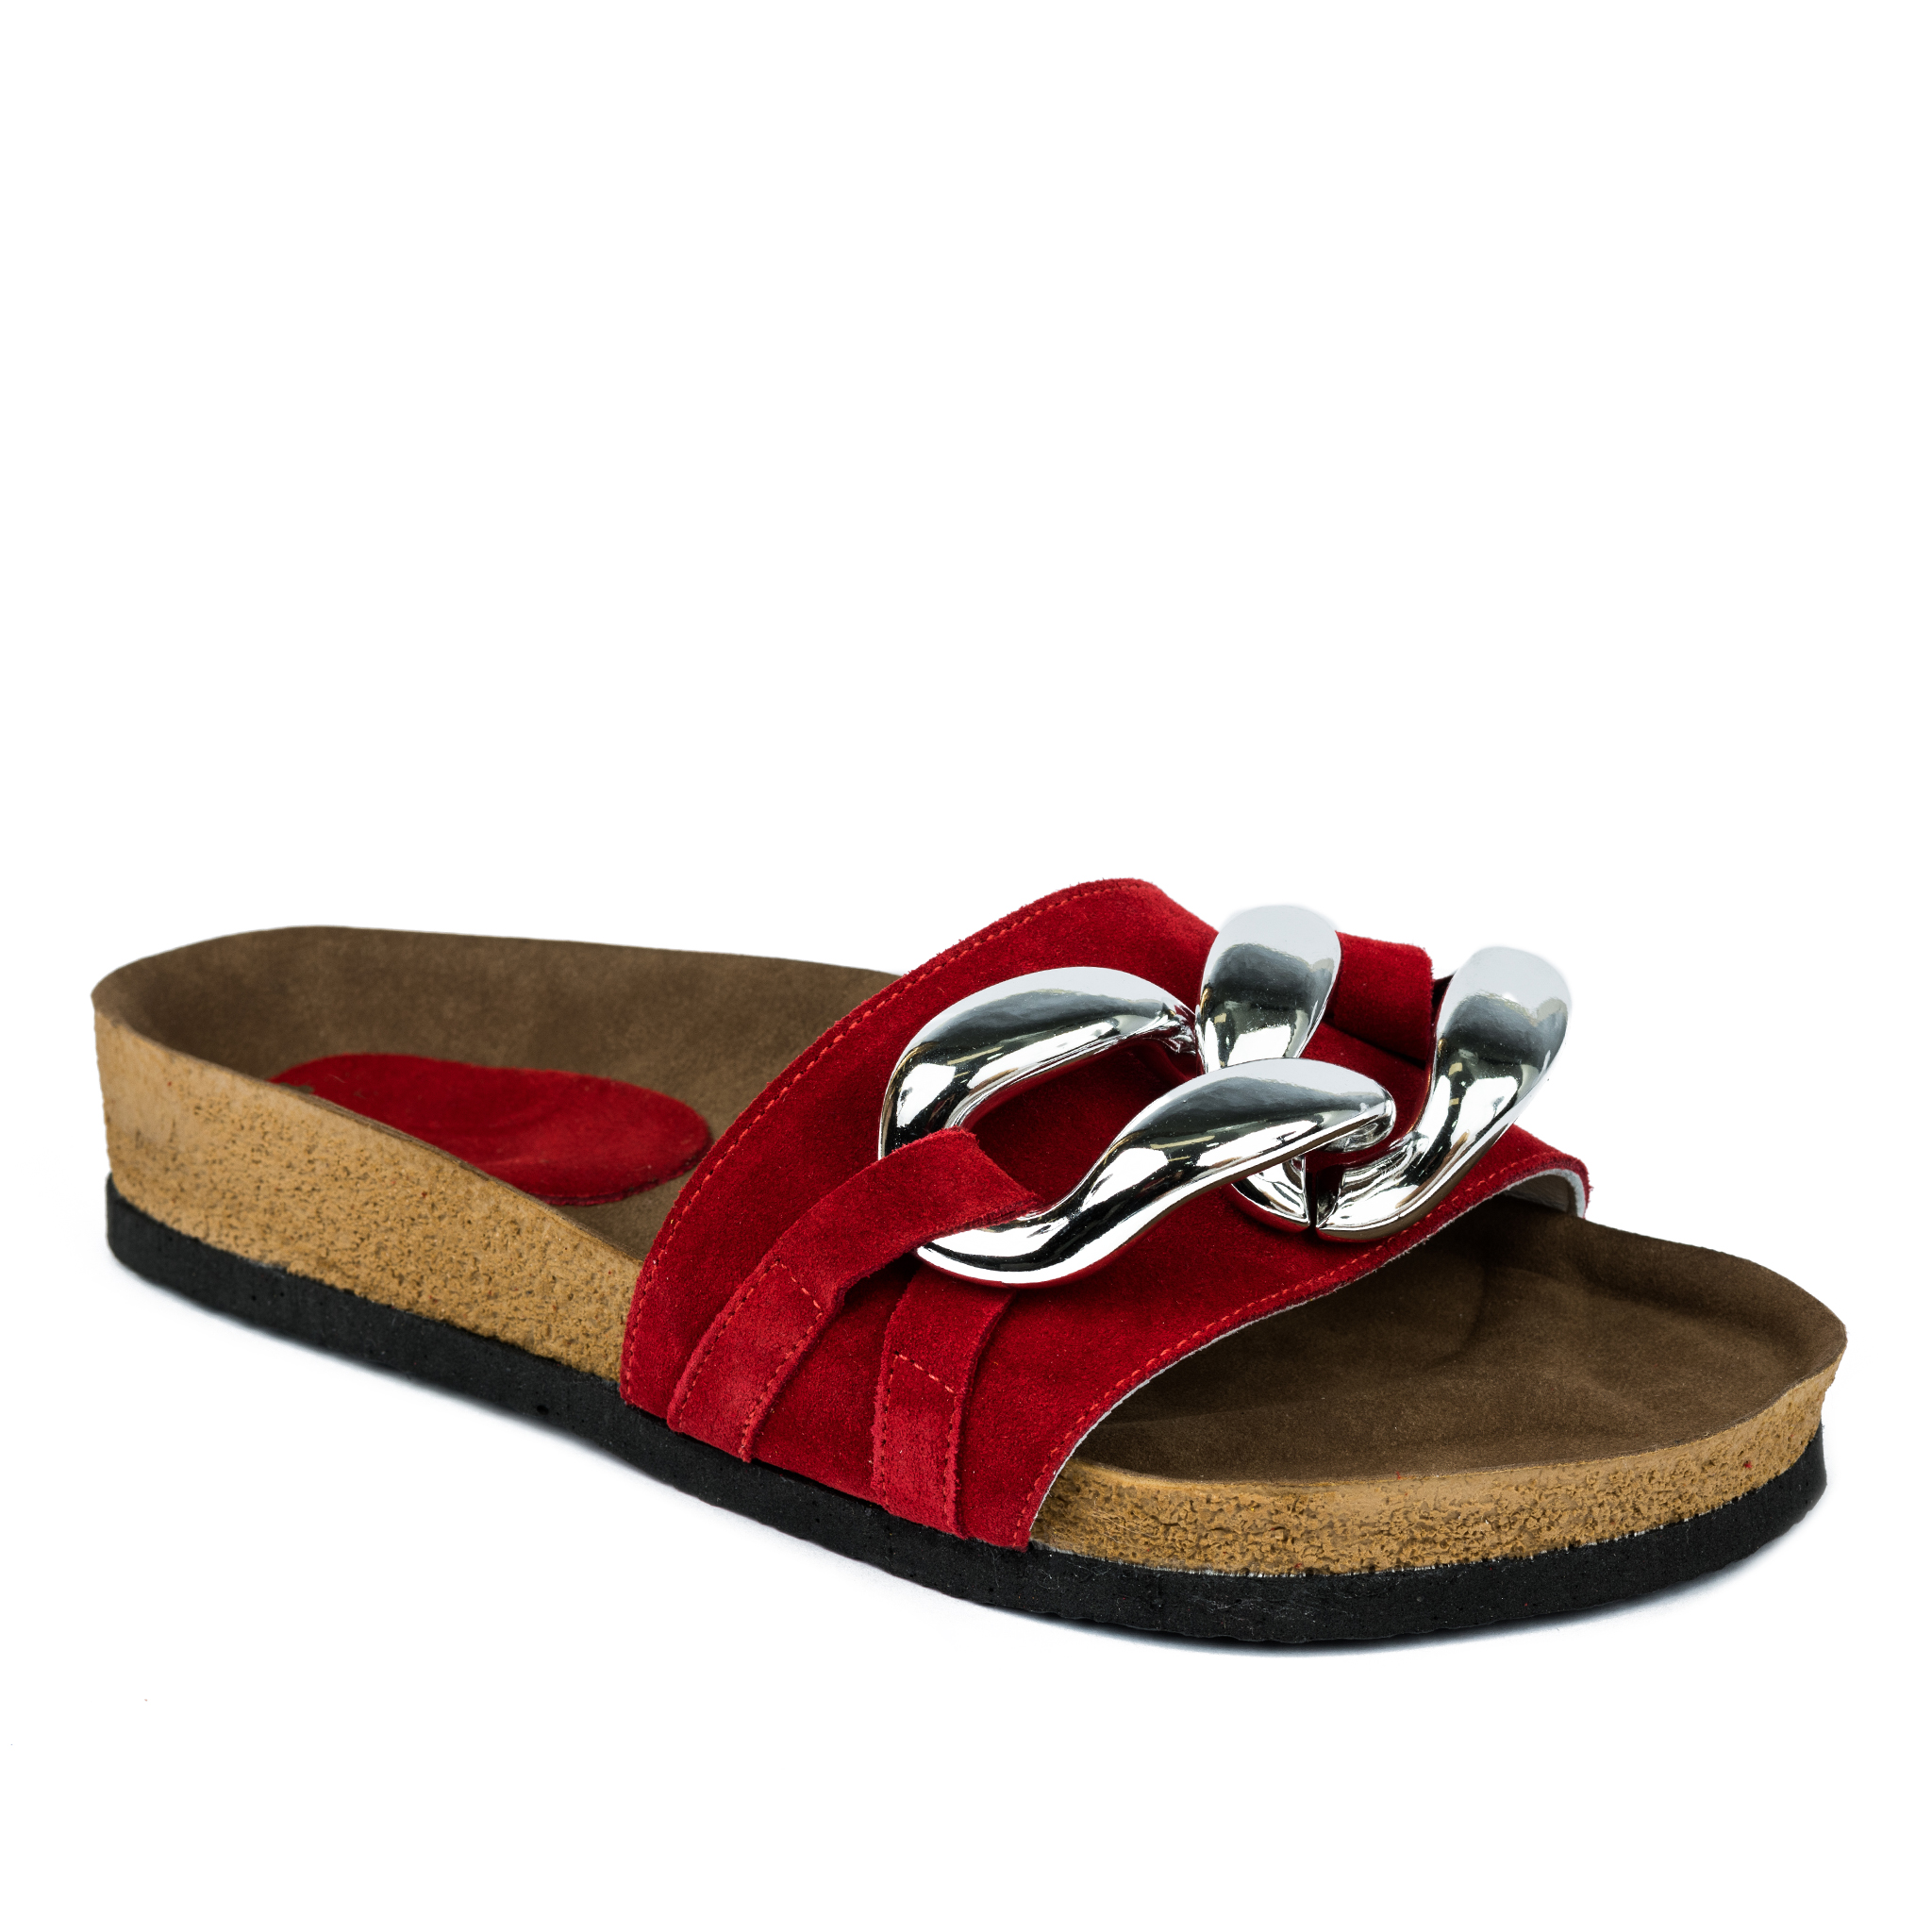 Leather slippers A741 - RED